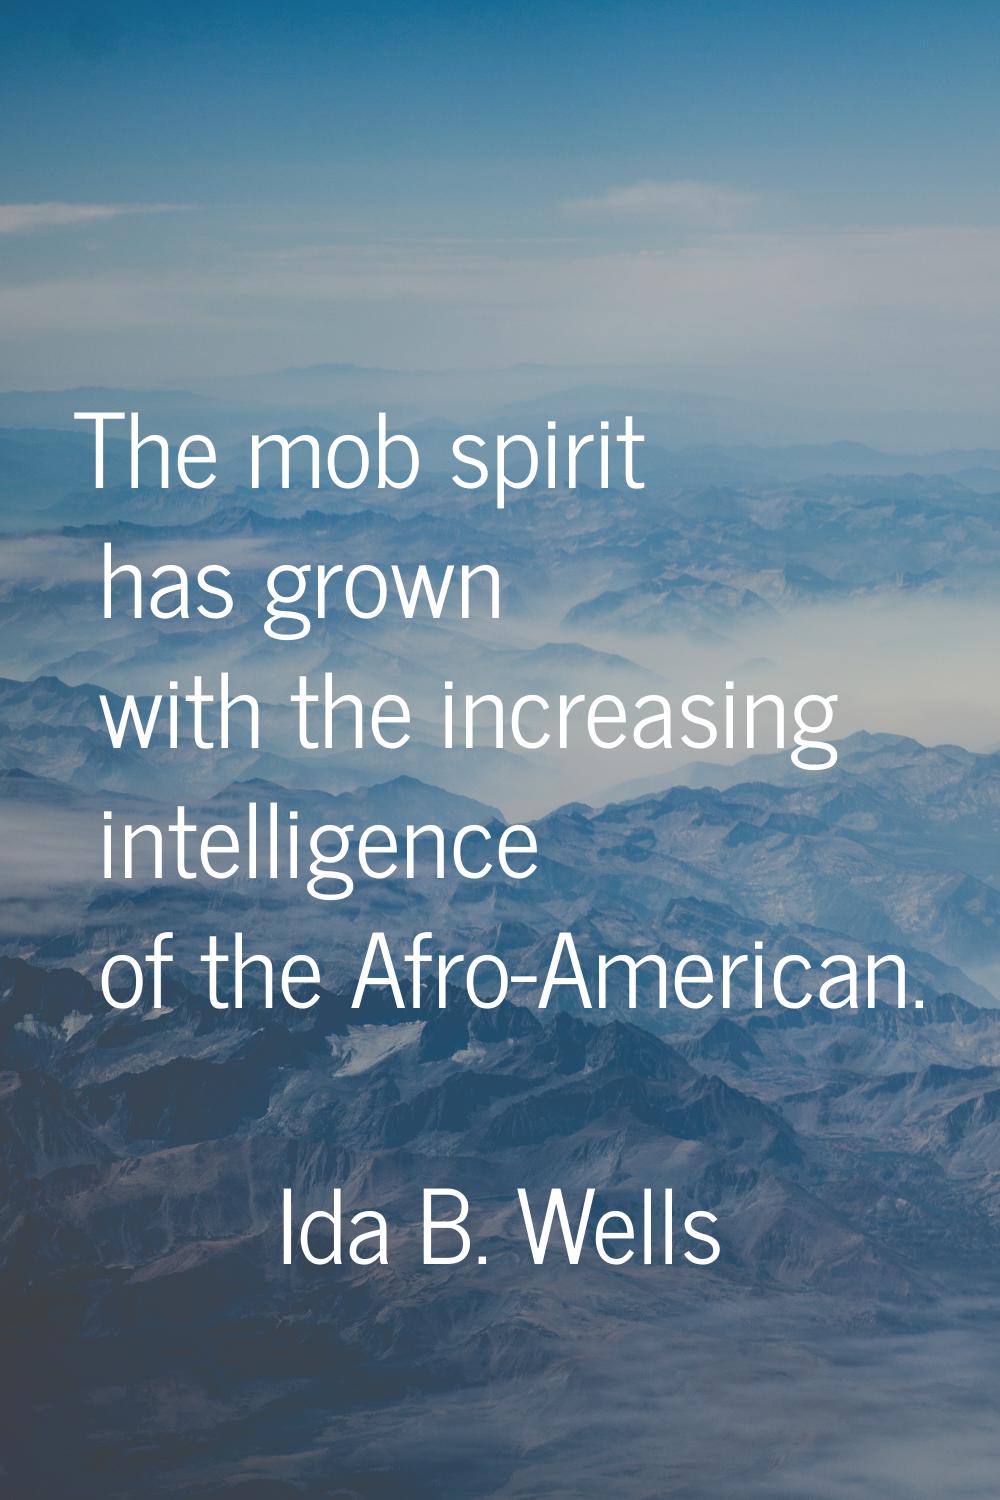 The mob spirit has grown with the increasing intelligence of the Afro-American.